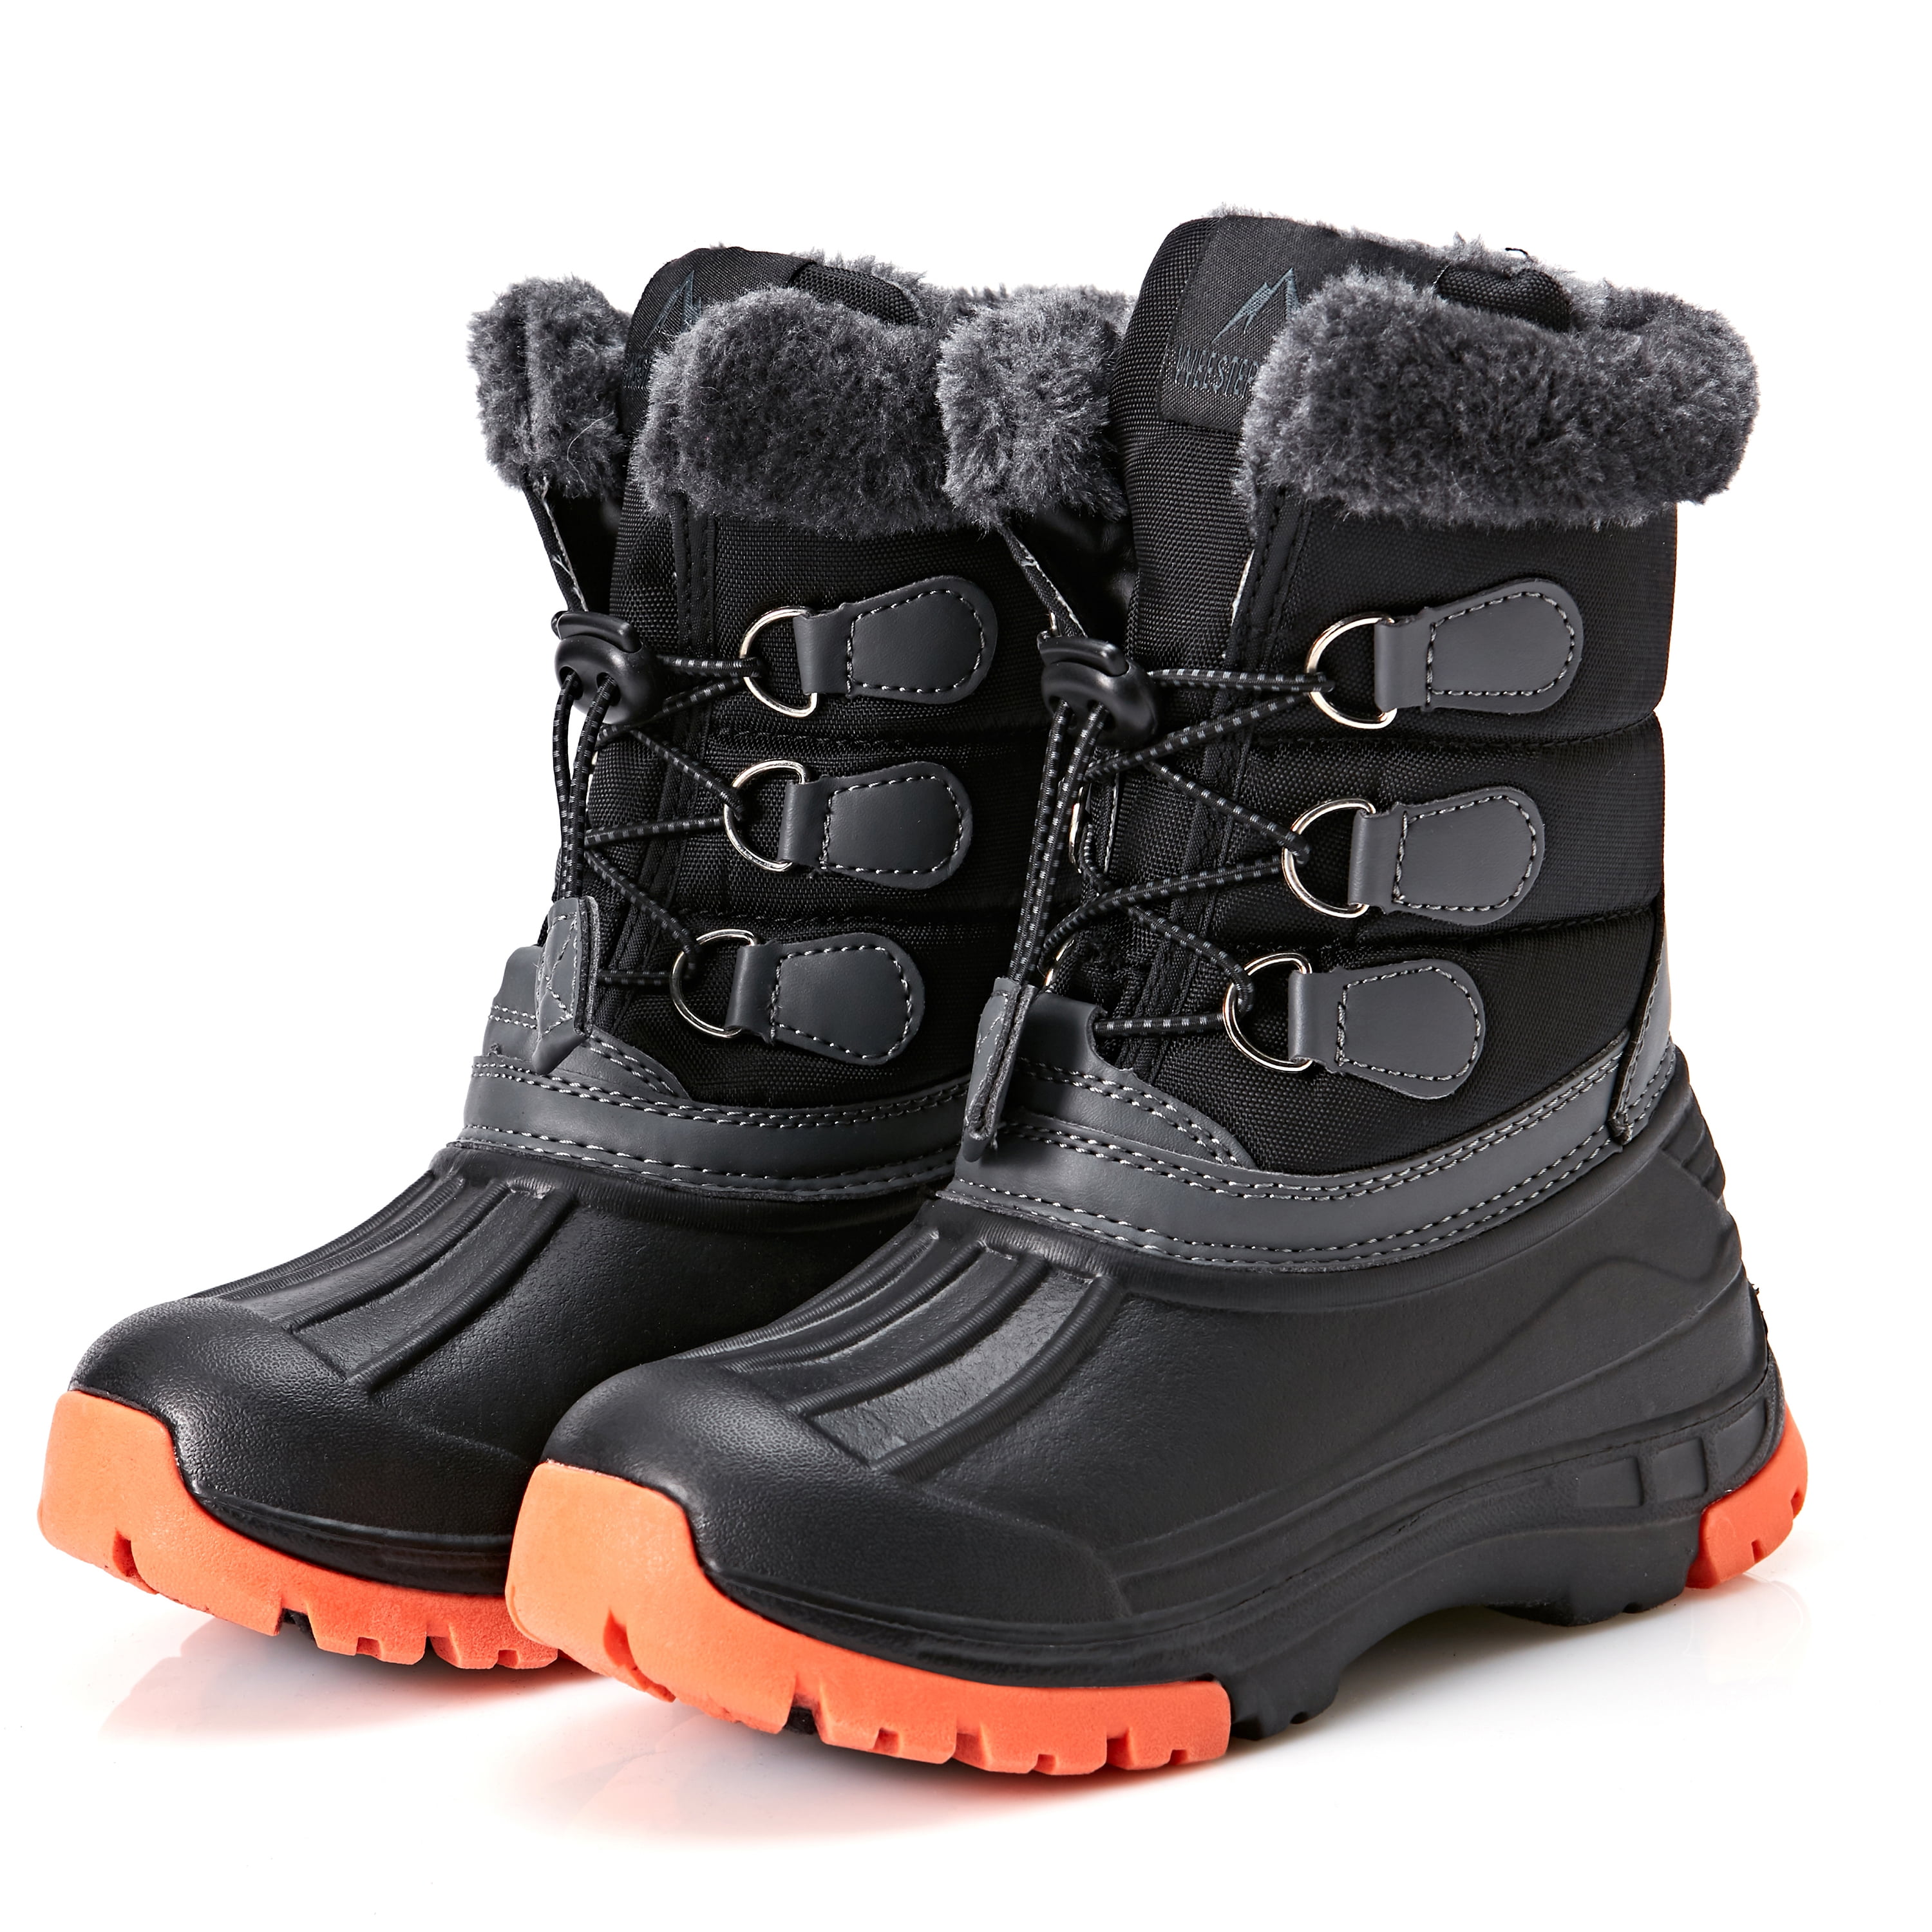 Winter Toddler Boys Girls Kids Fleece Ankle Snow Boots Thermal Lace Warm Shoes 